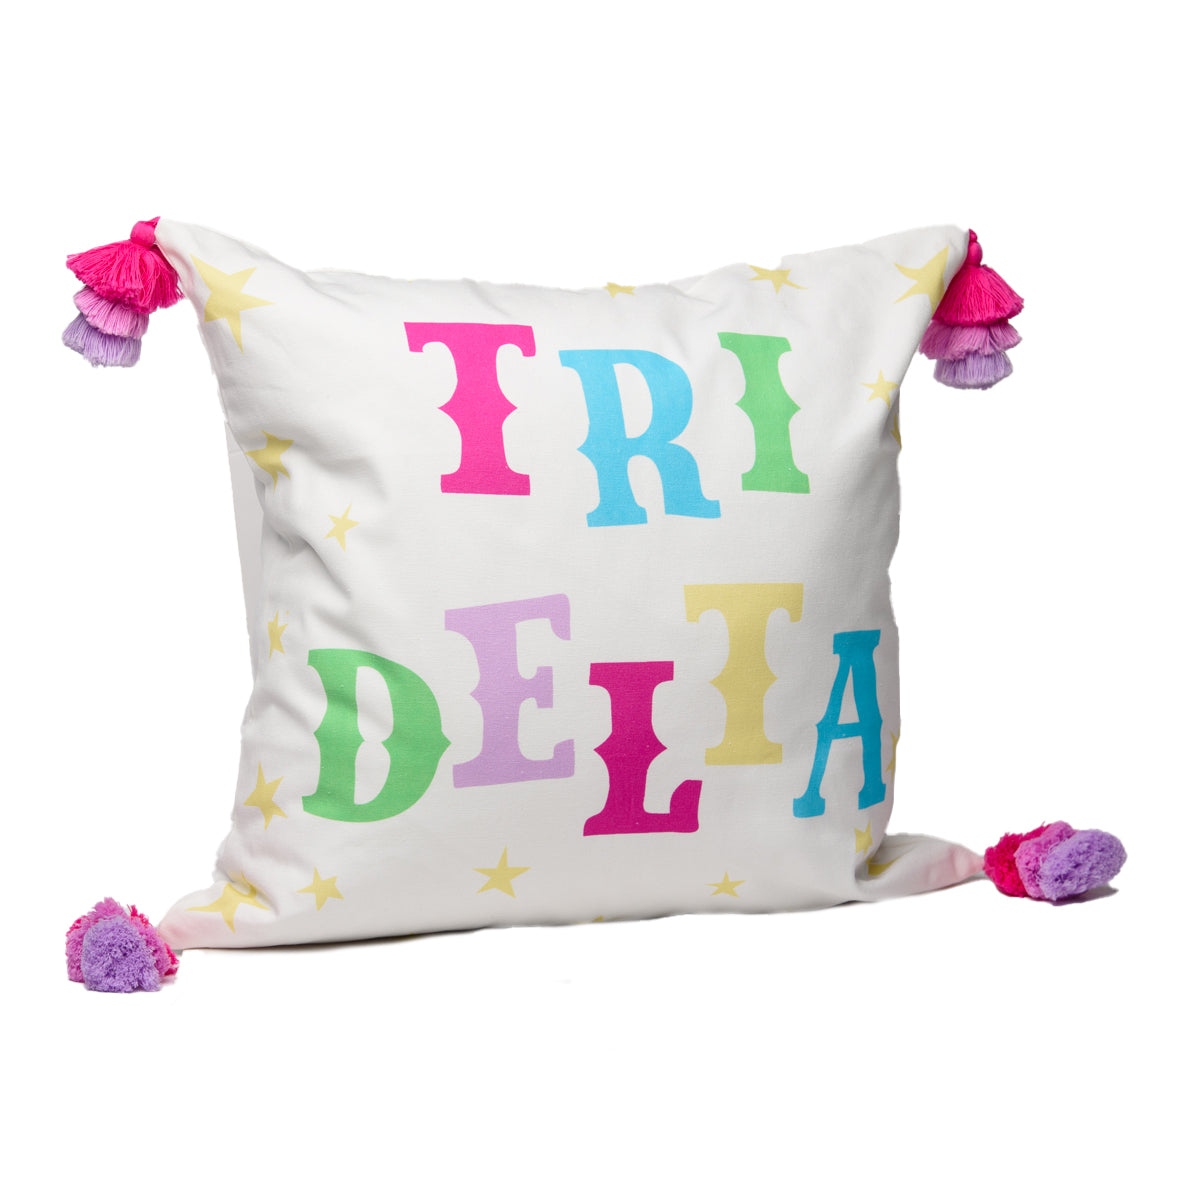 TRI DELTA Oh My Stars" Printed Pillow